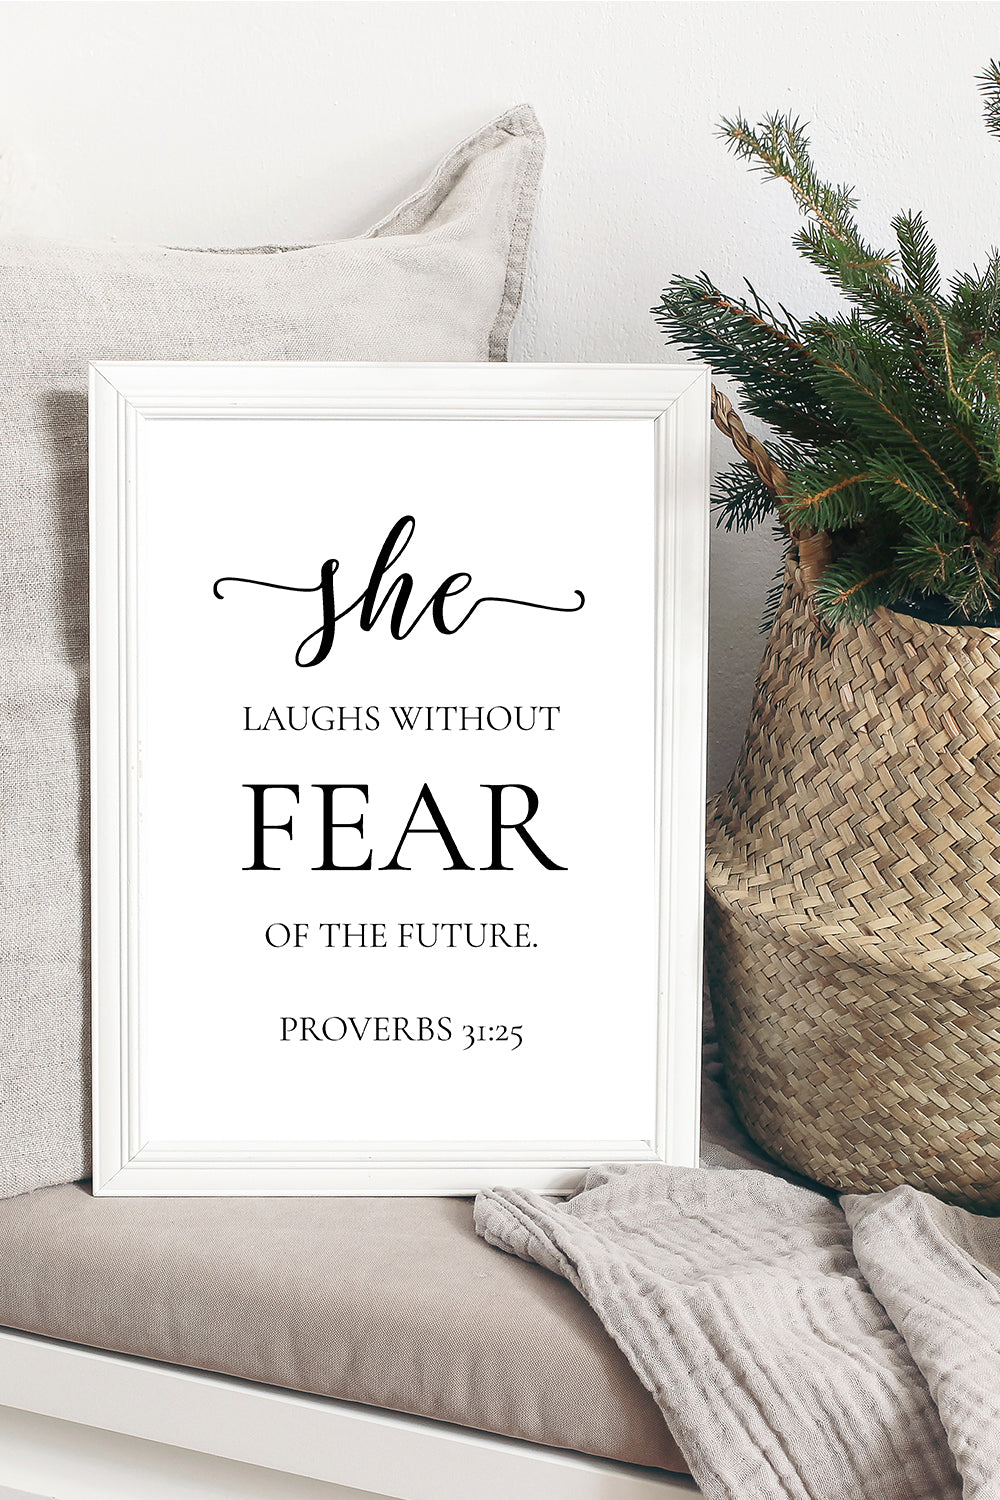 She laughs without FEAR Printable